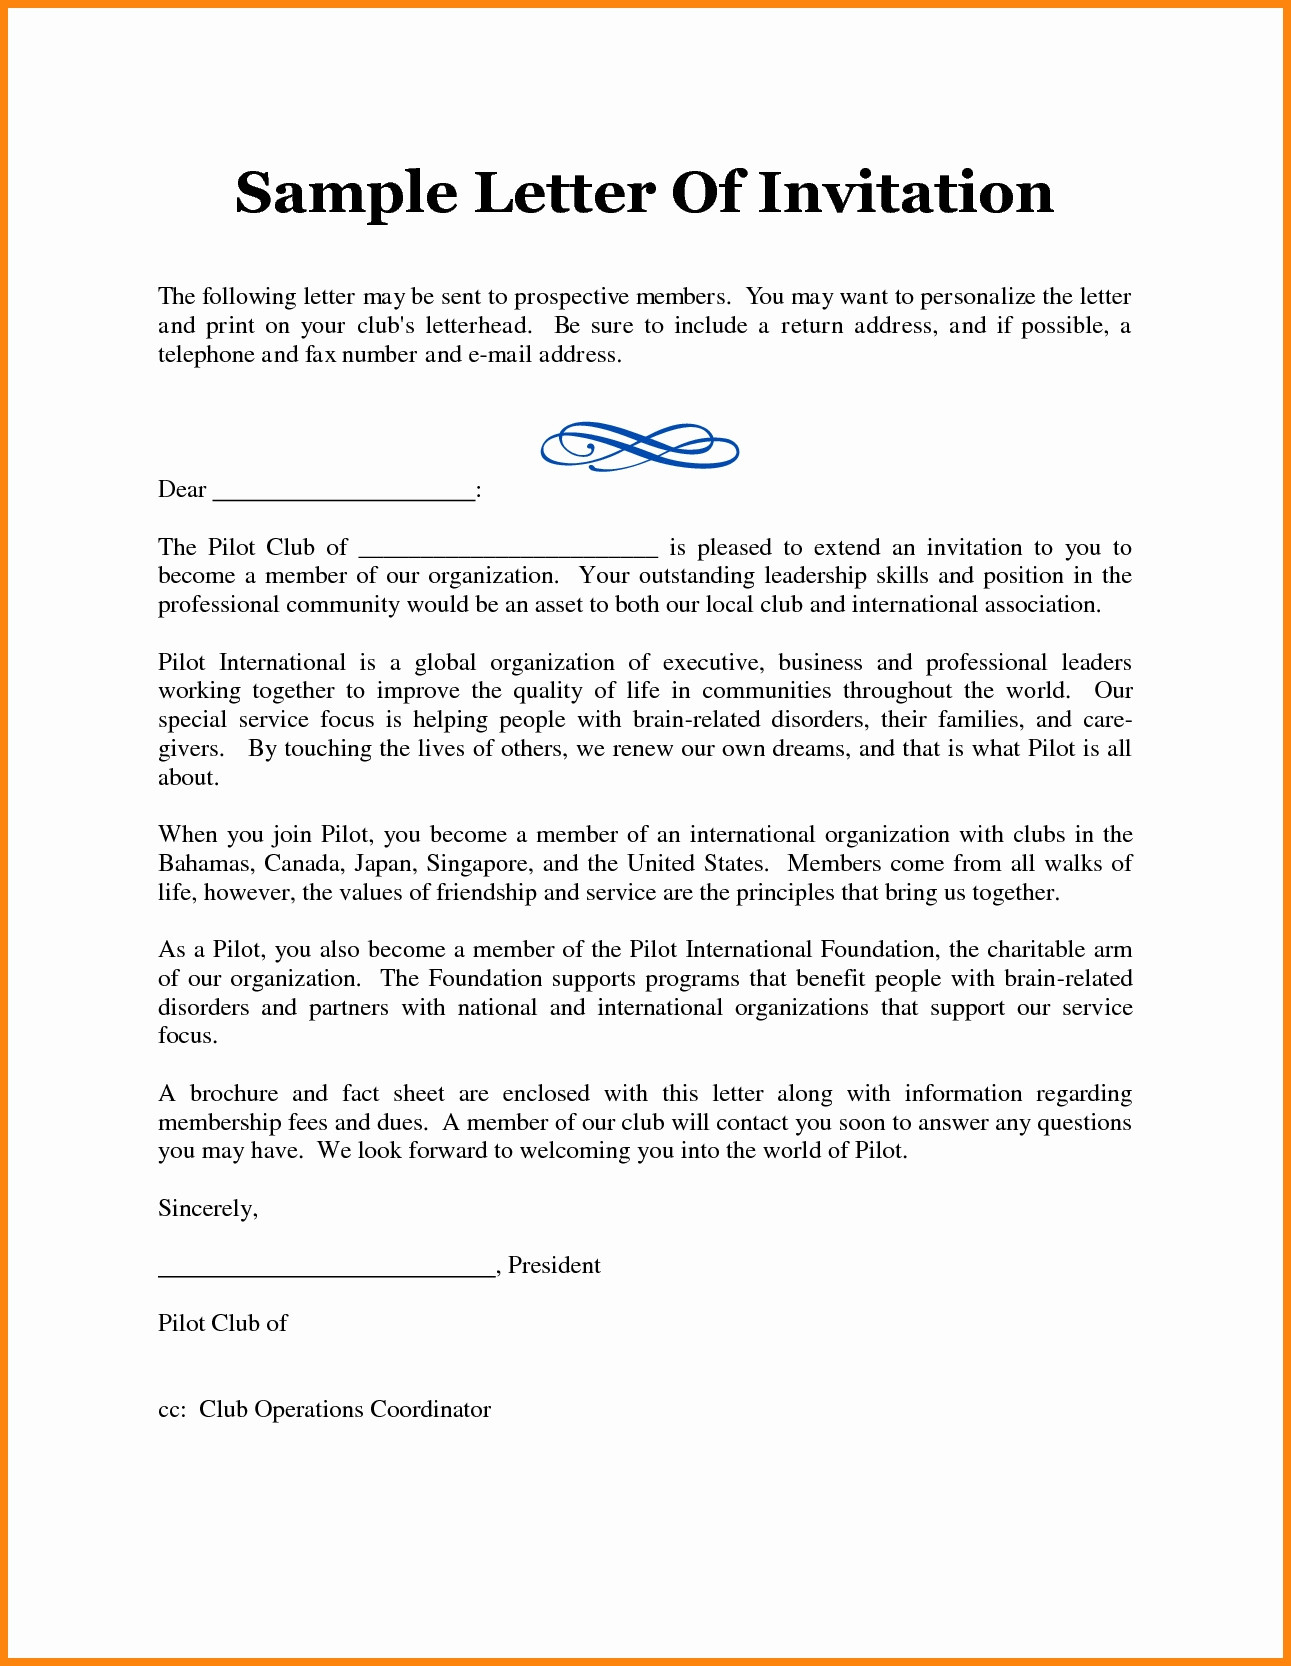 Party Invitation Letter